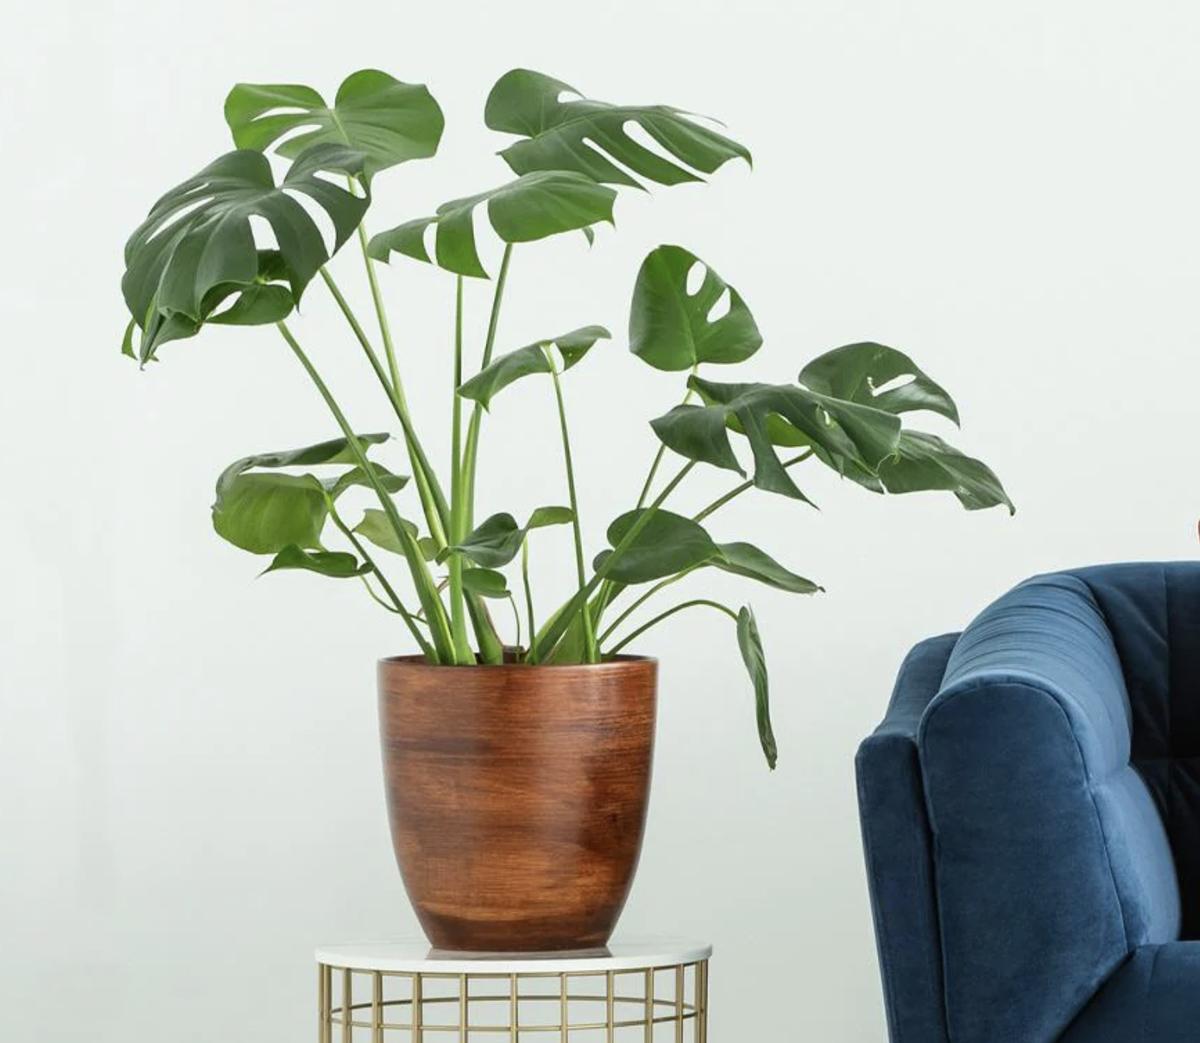 5 easy DIY remedies for dying houseplants - we're not going to let you lose them